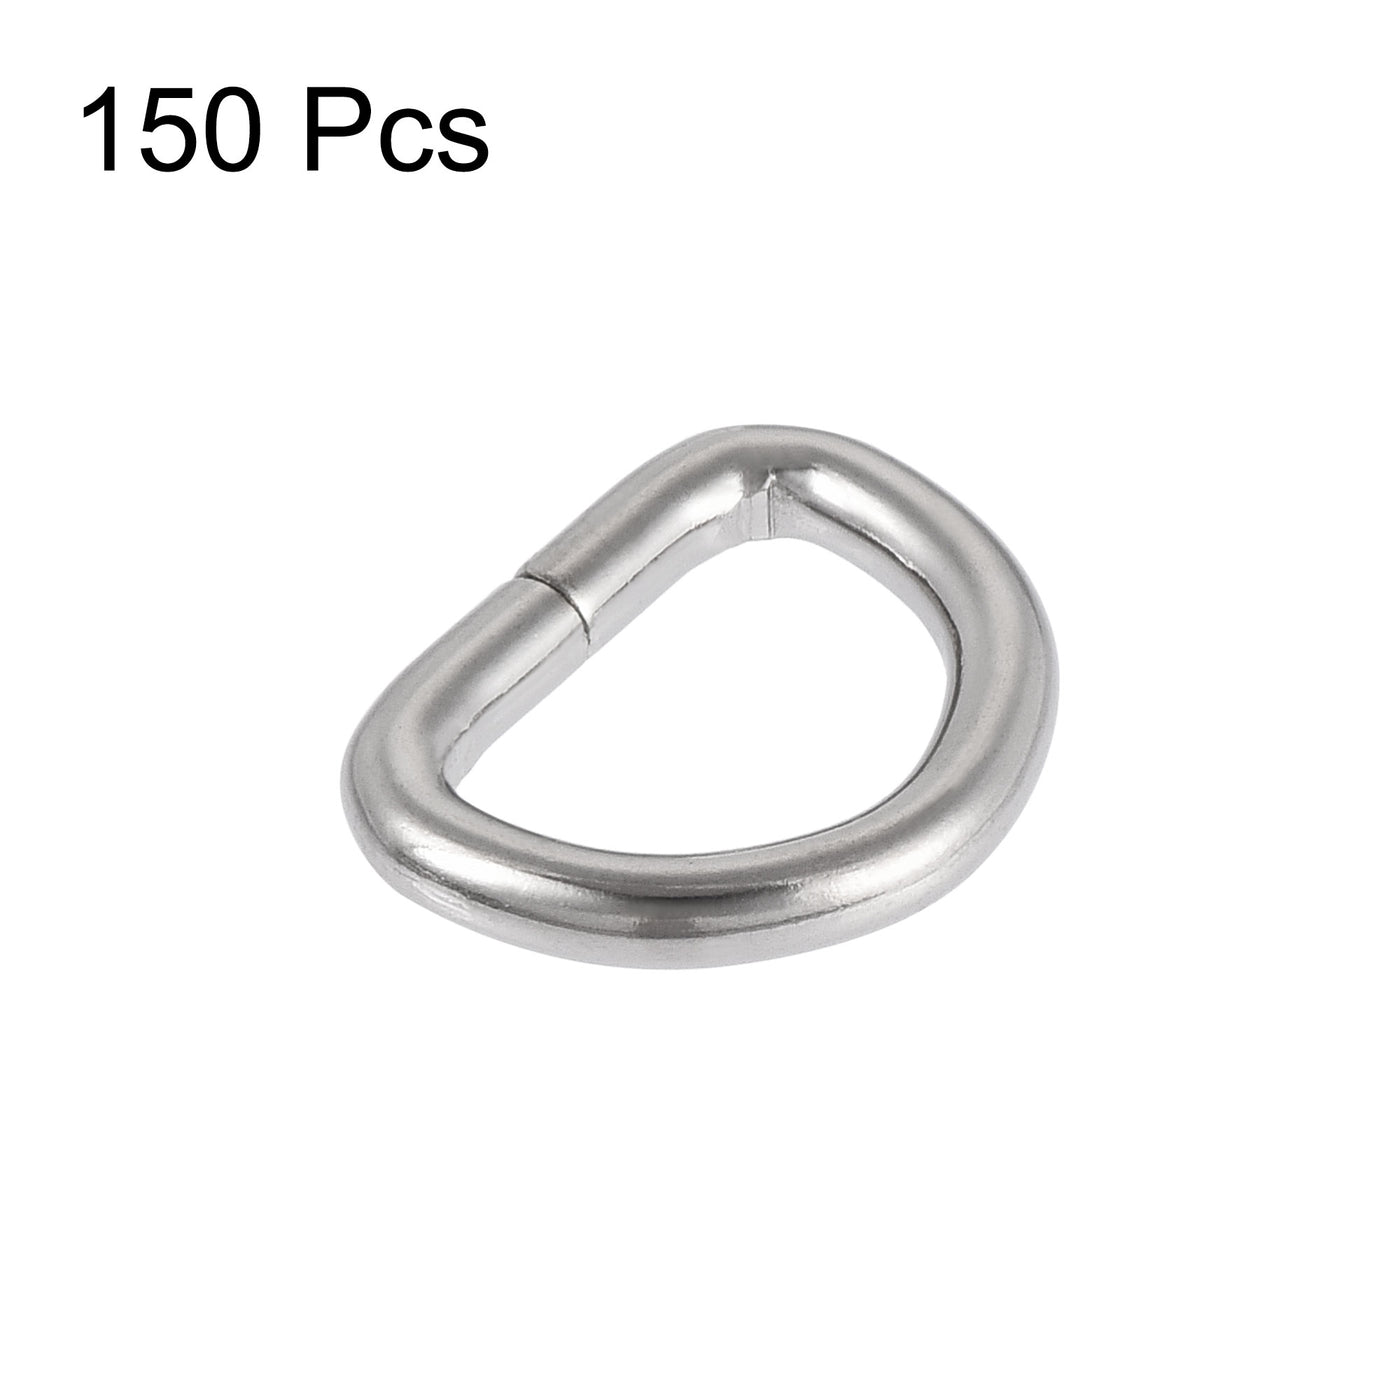 uxcell Uxcell Metal D Ring 0.51"(13mm) D-Rings Buckle for Hardware Bags Belts Craft DIY Accessories Silver Tone 150pcs